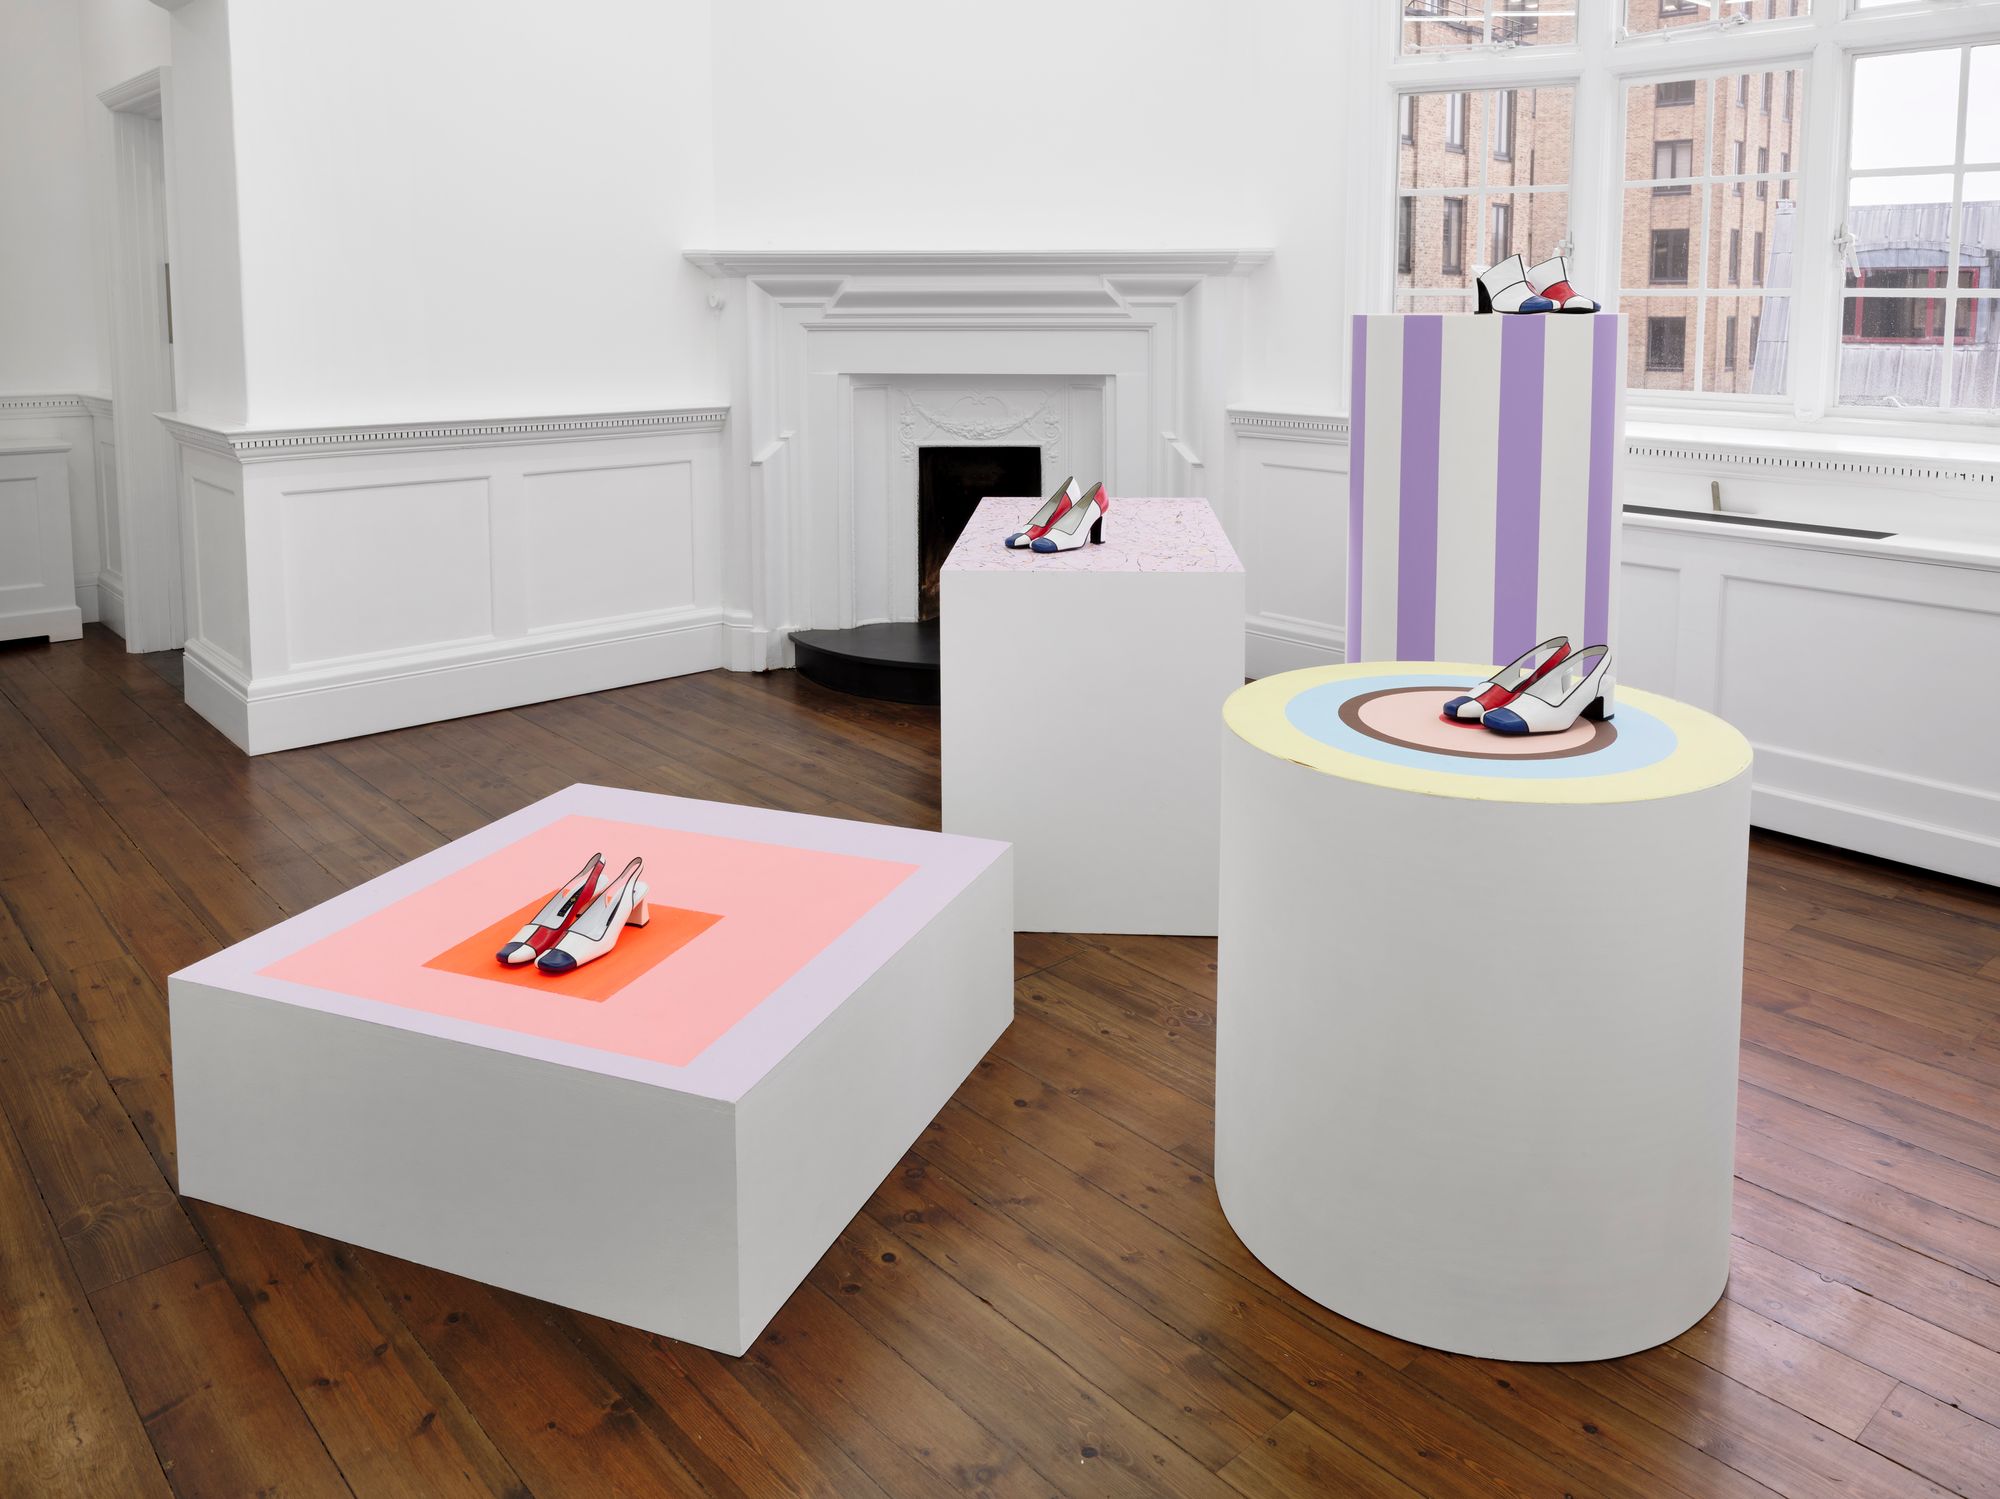 Sylvie Fleury: S.F. at Spruth Magers review